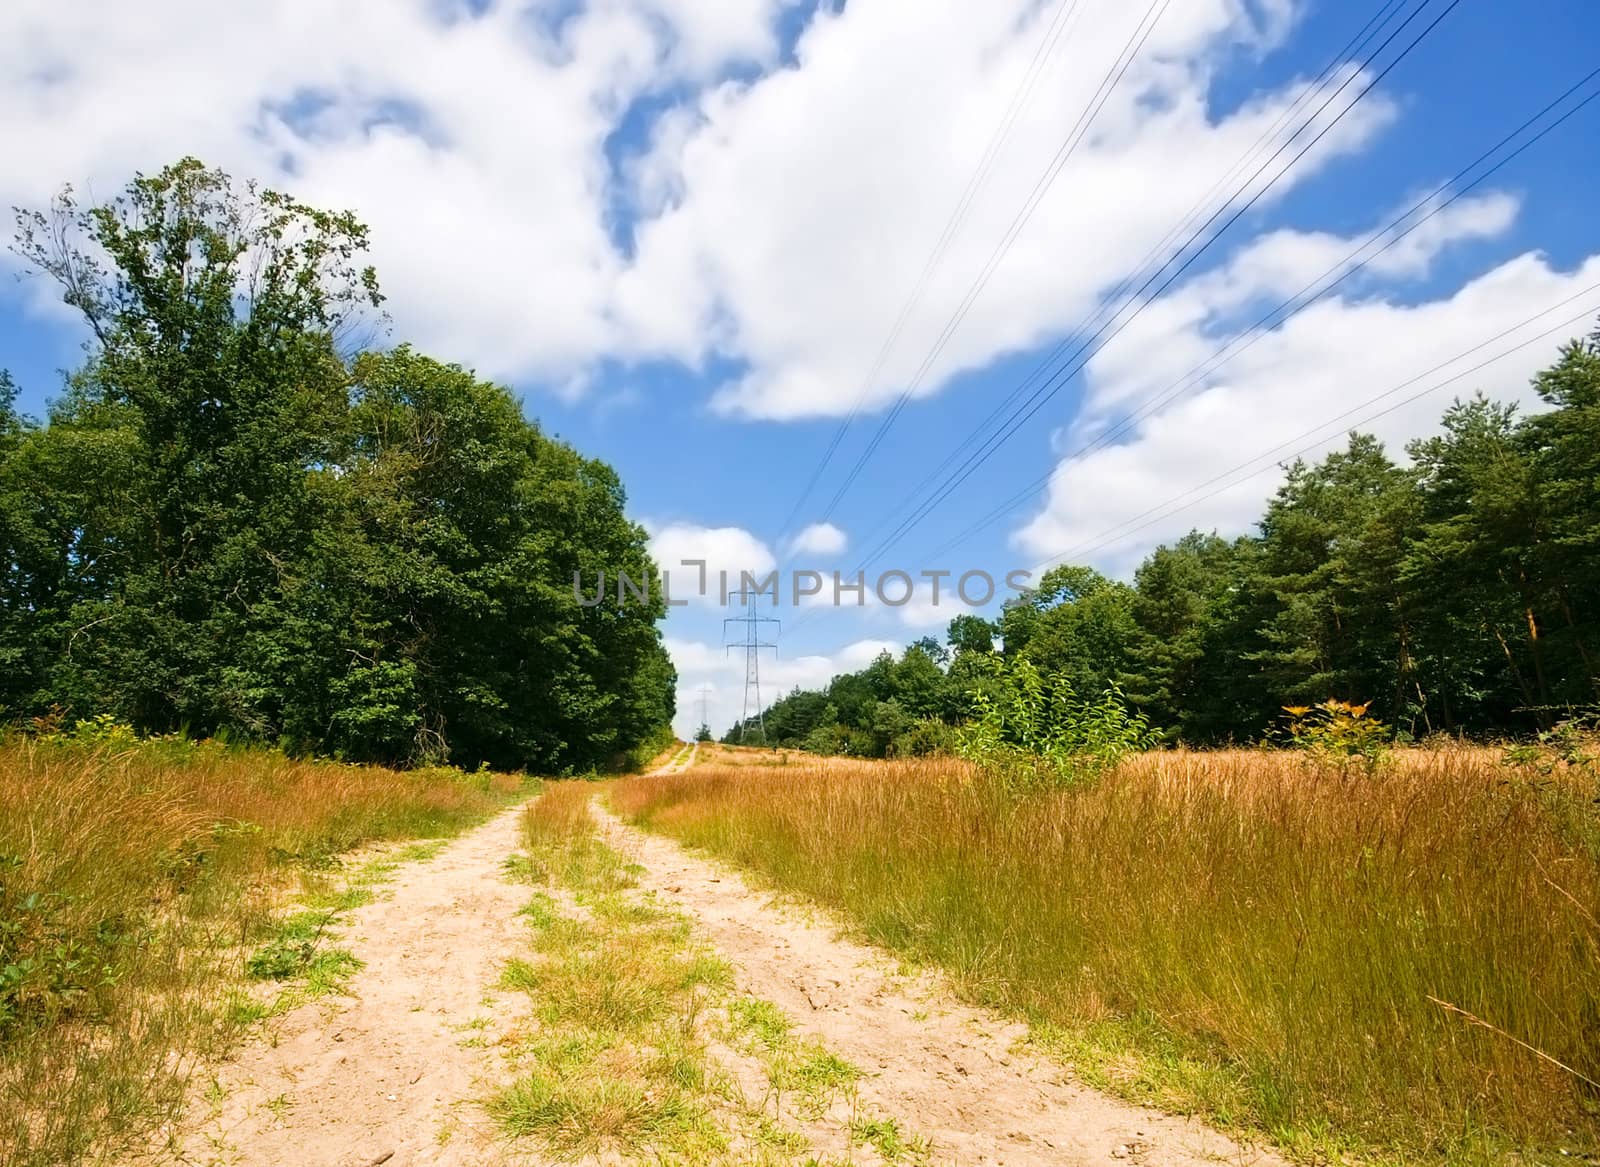 sand path in a rural environment with cloudy blue sky